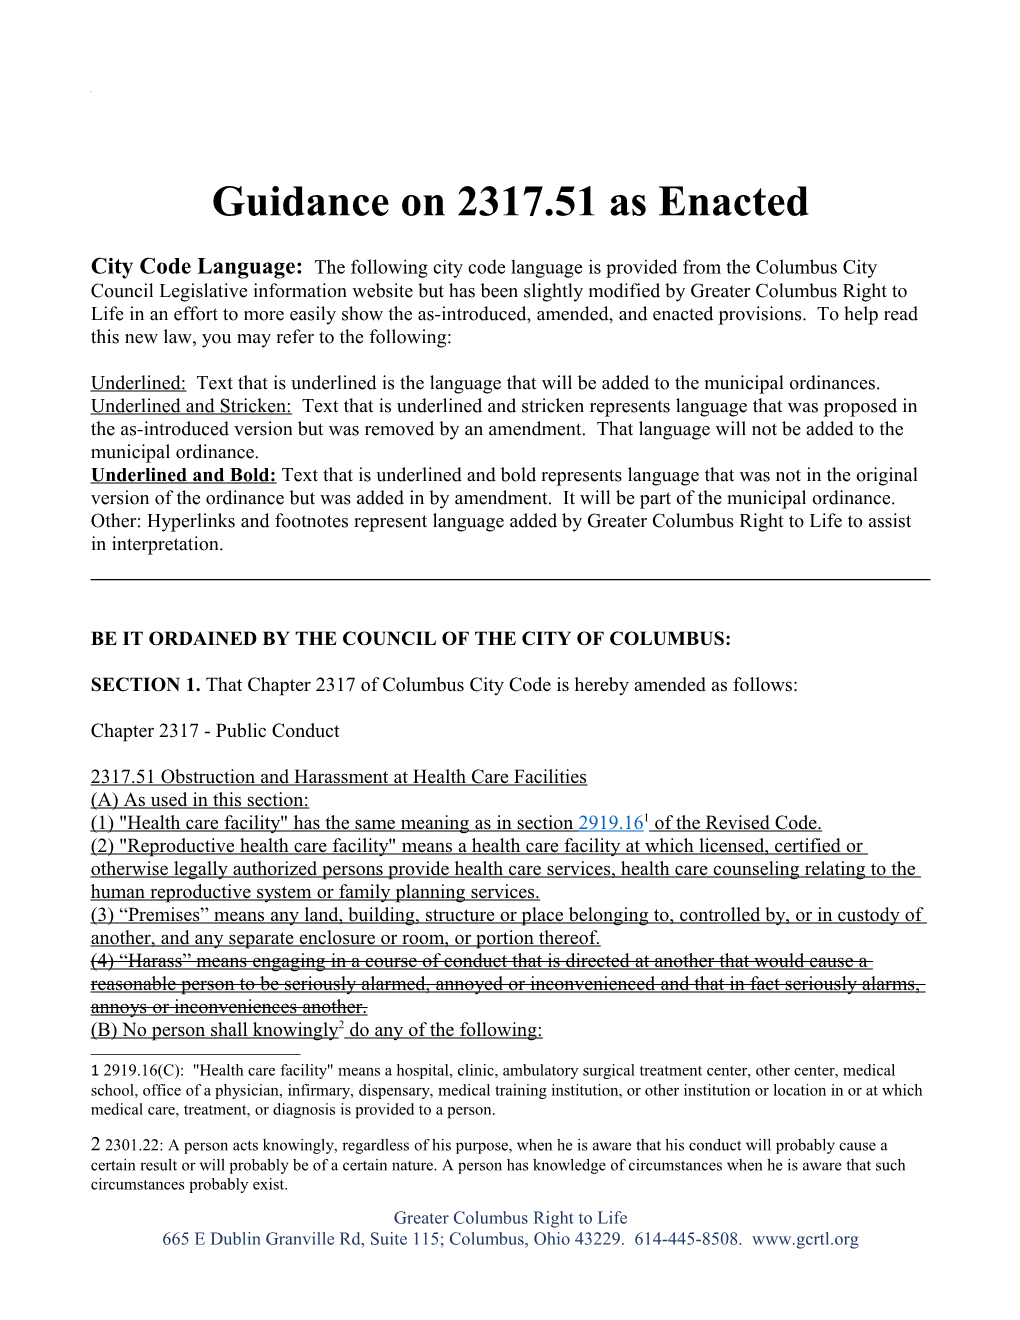 Guidance on 2317.51 As Enacted